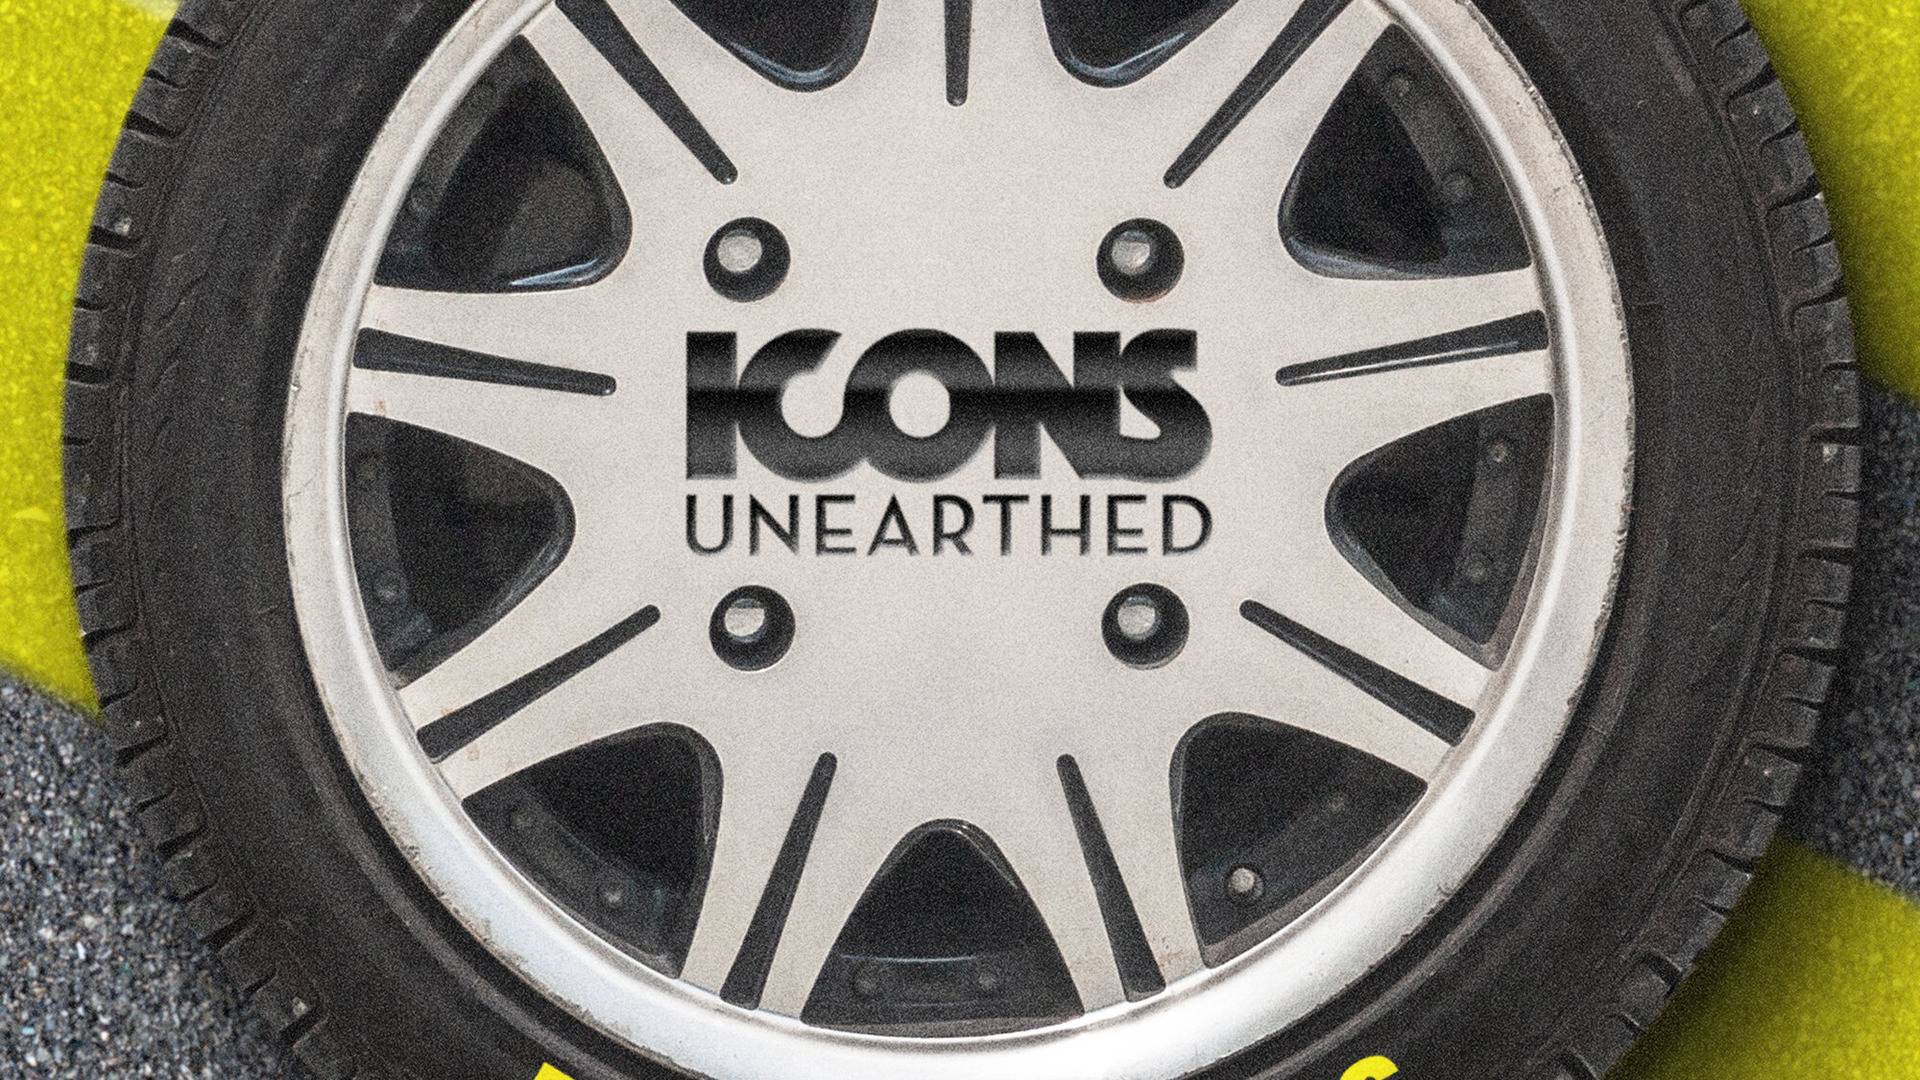 Show Icons Unearthed: Fast & Furious